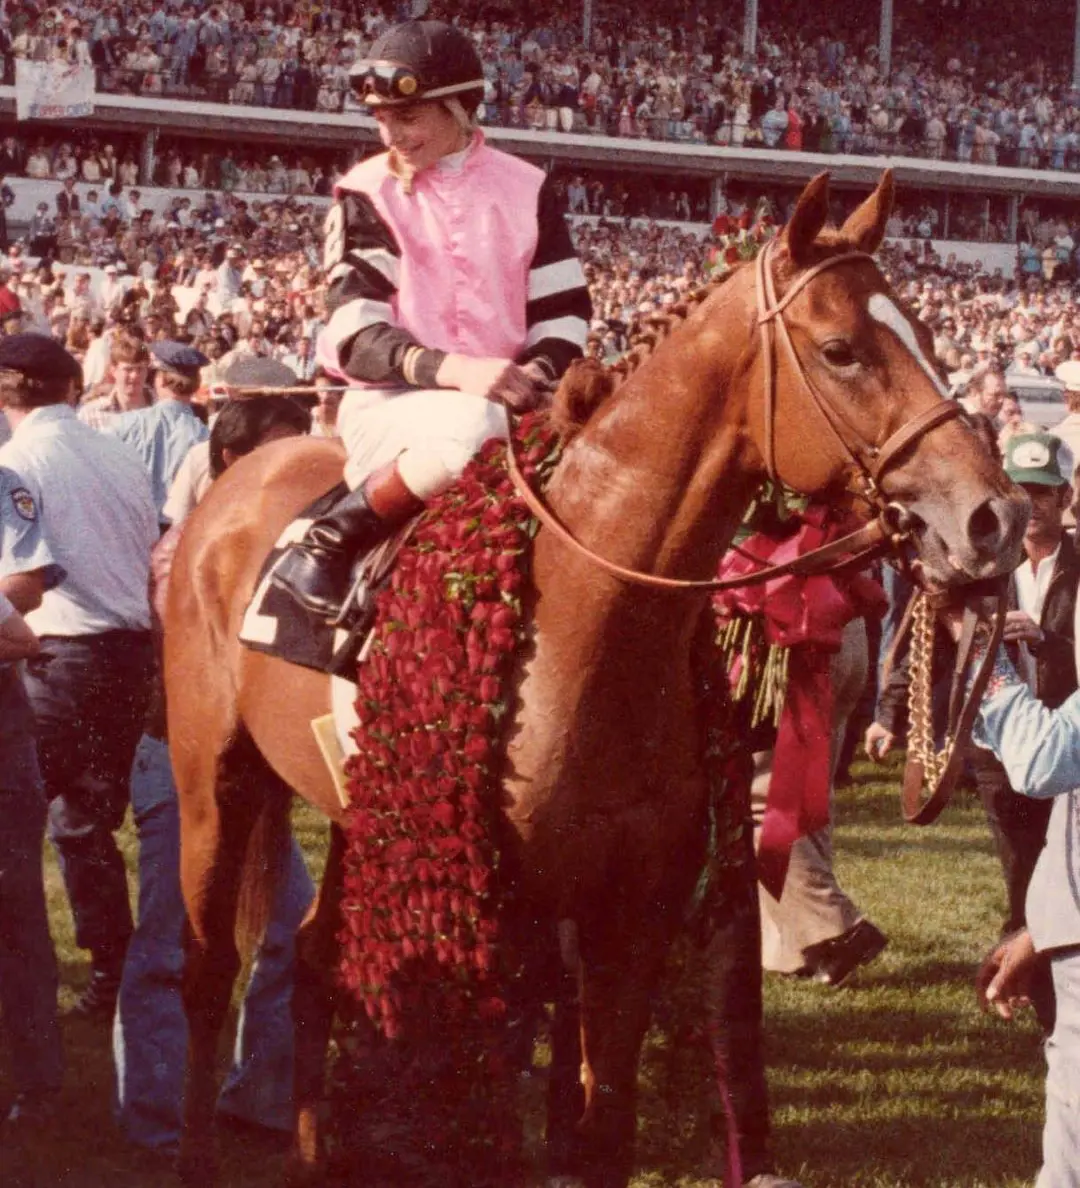 Affirmed lauded by a huge crowd in Kentucky after the victory in 1975.